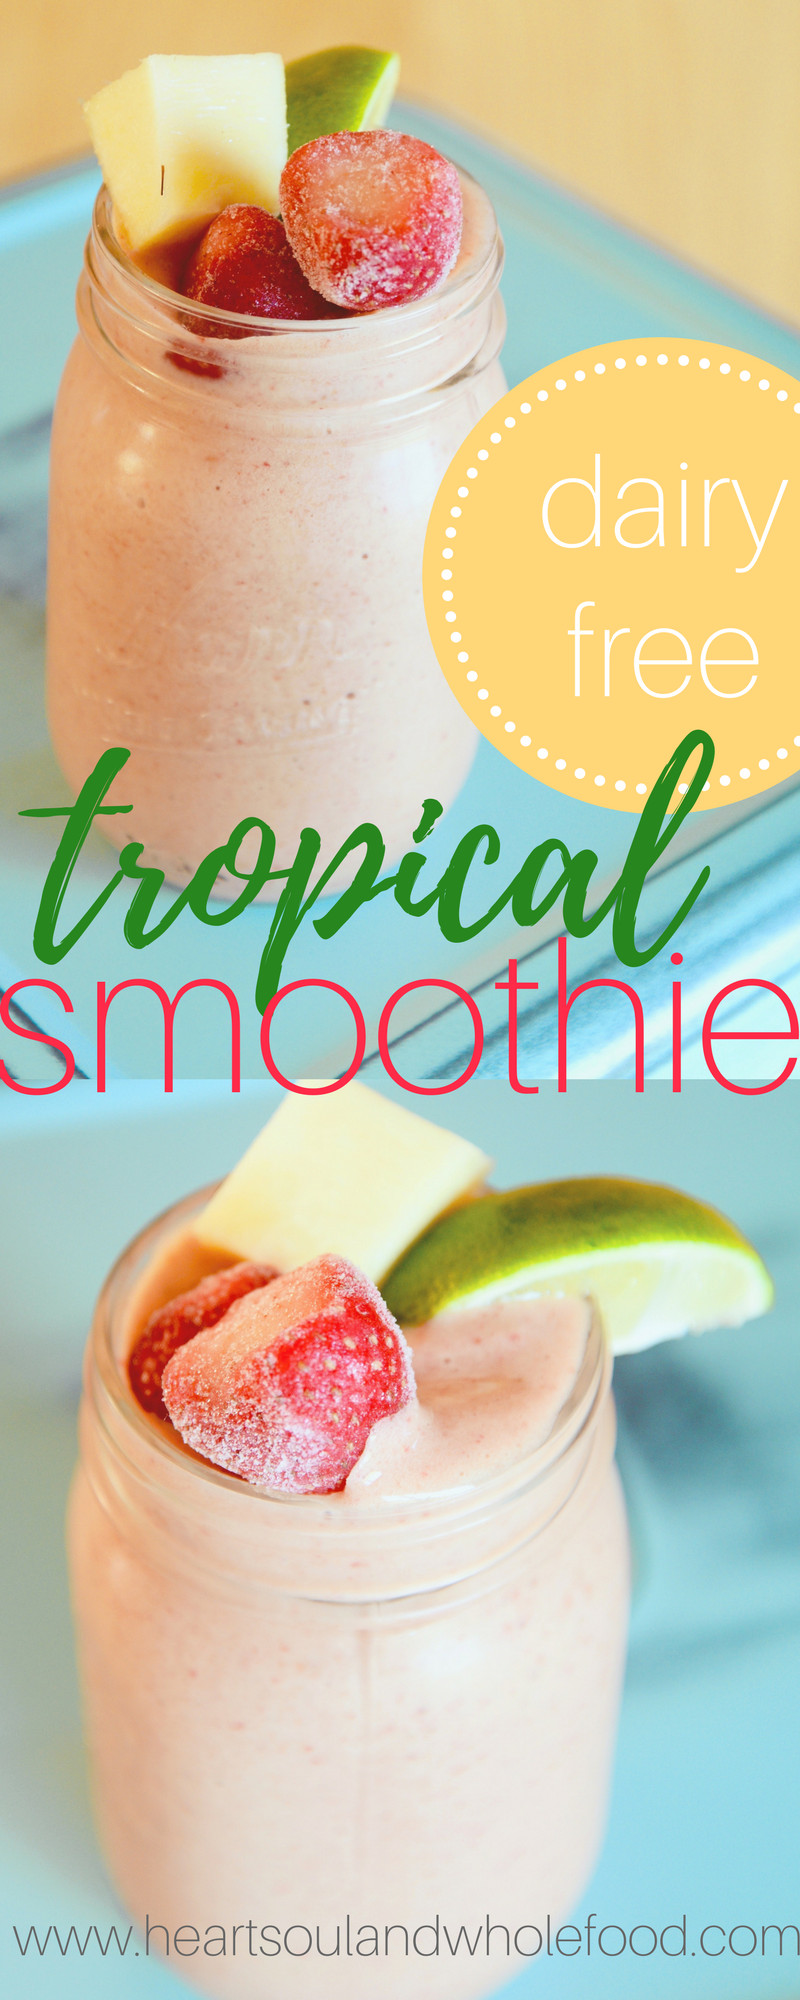 Dairy Free Smoothie Recipes
 Dairy Free Tropical Smoothie Recipe The Fun Sized Life